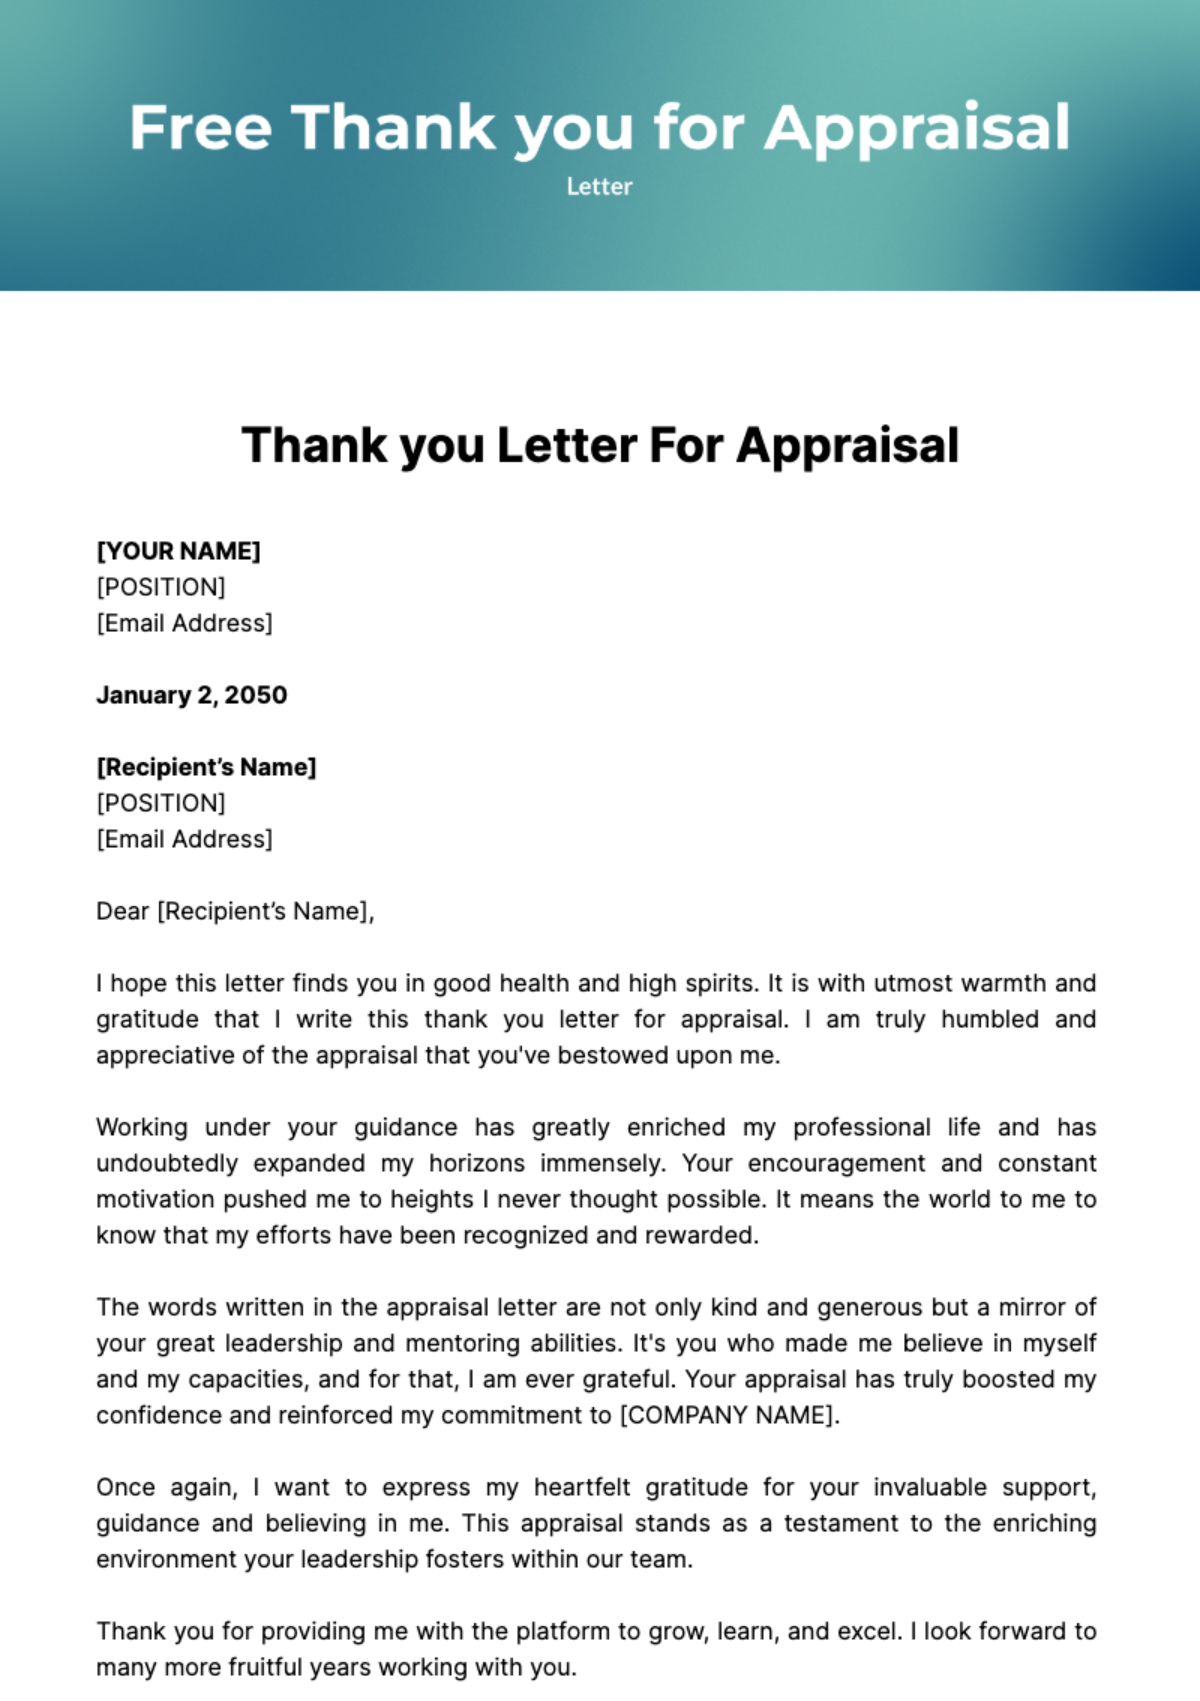 Free Thank you Letter for Appraisal Template